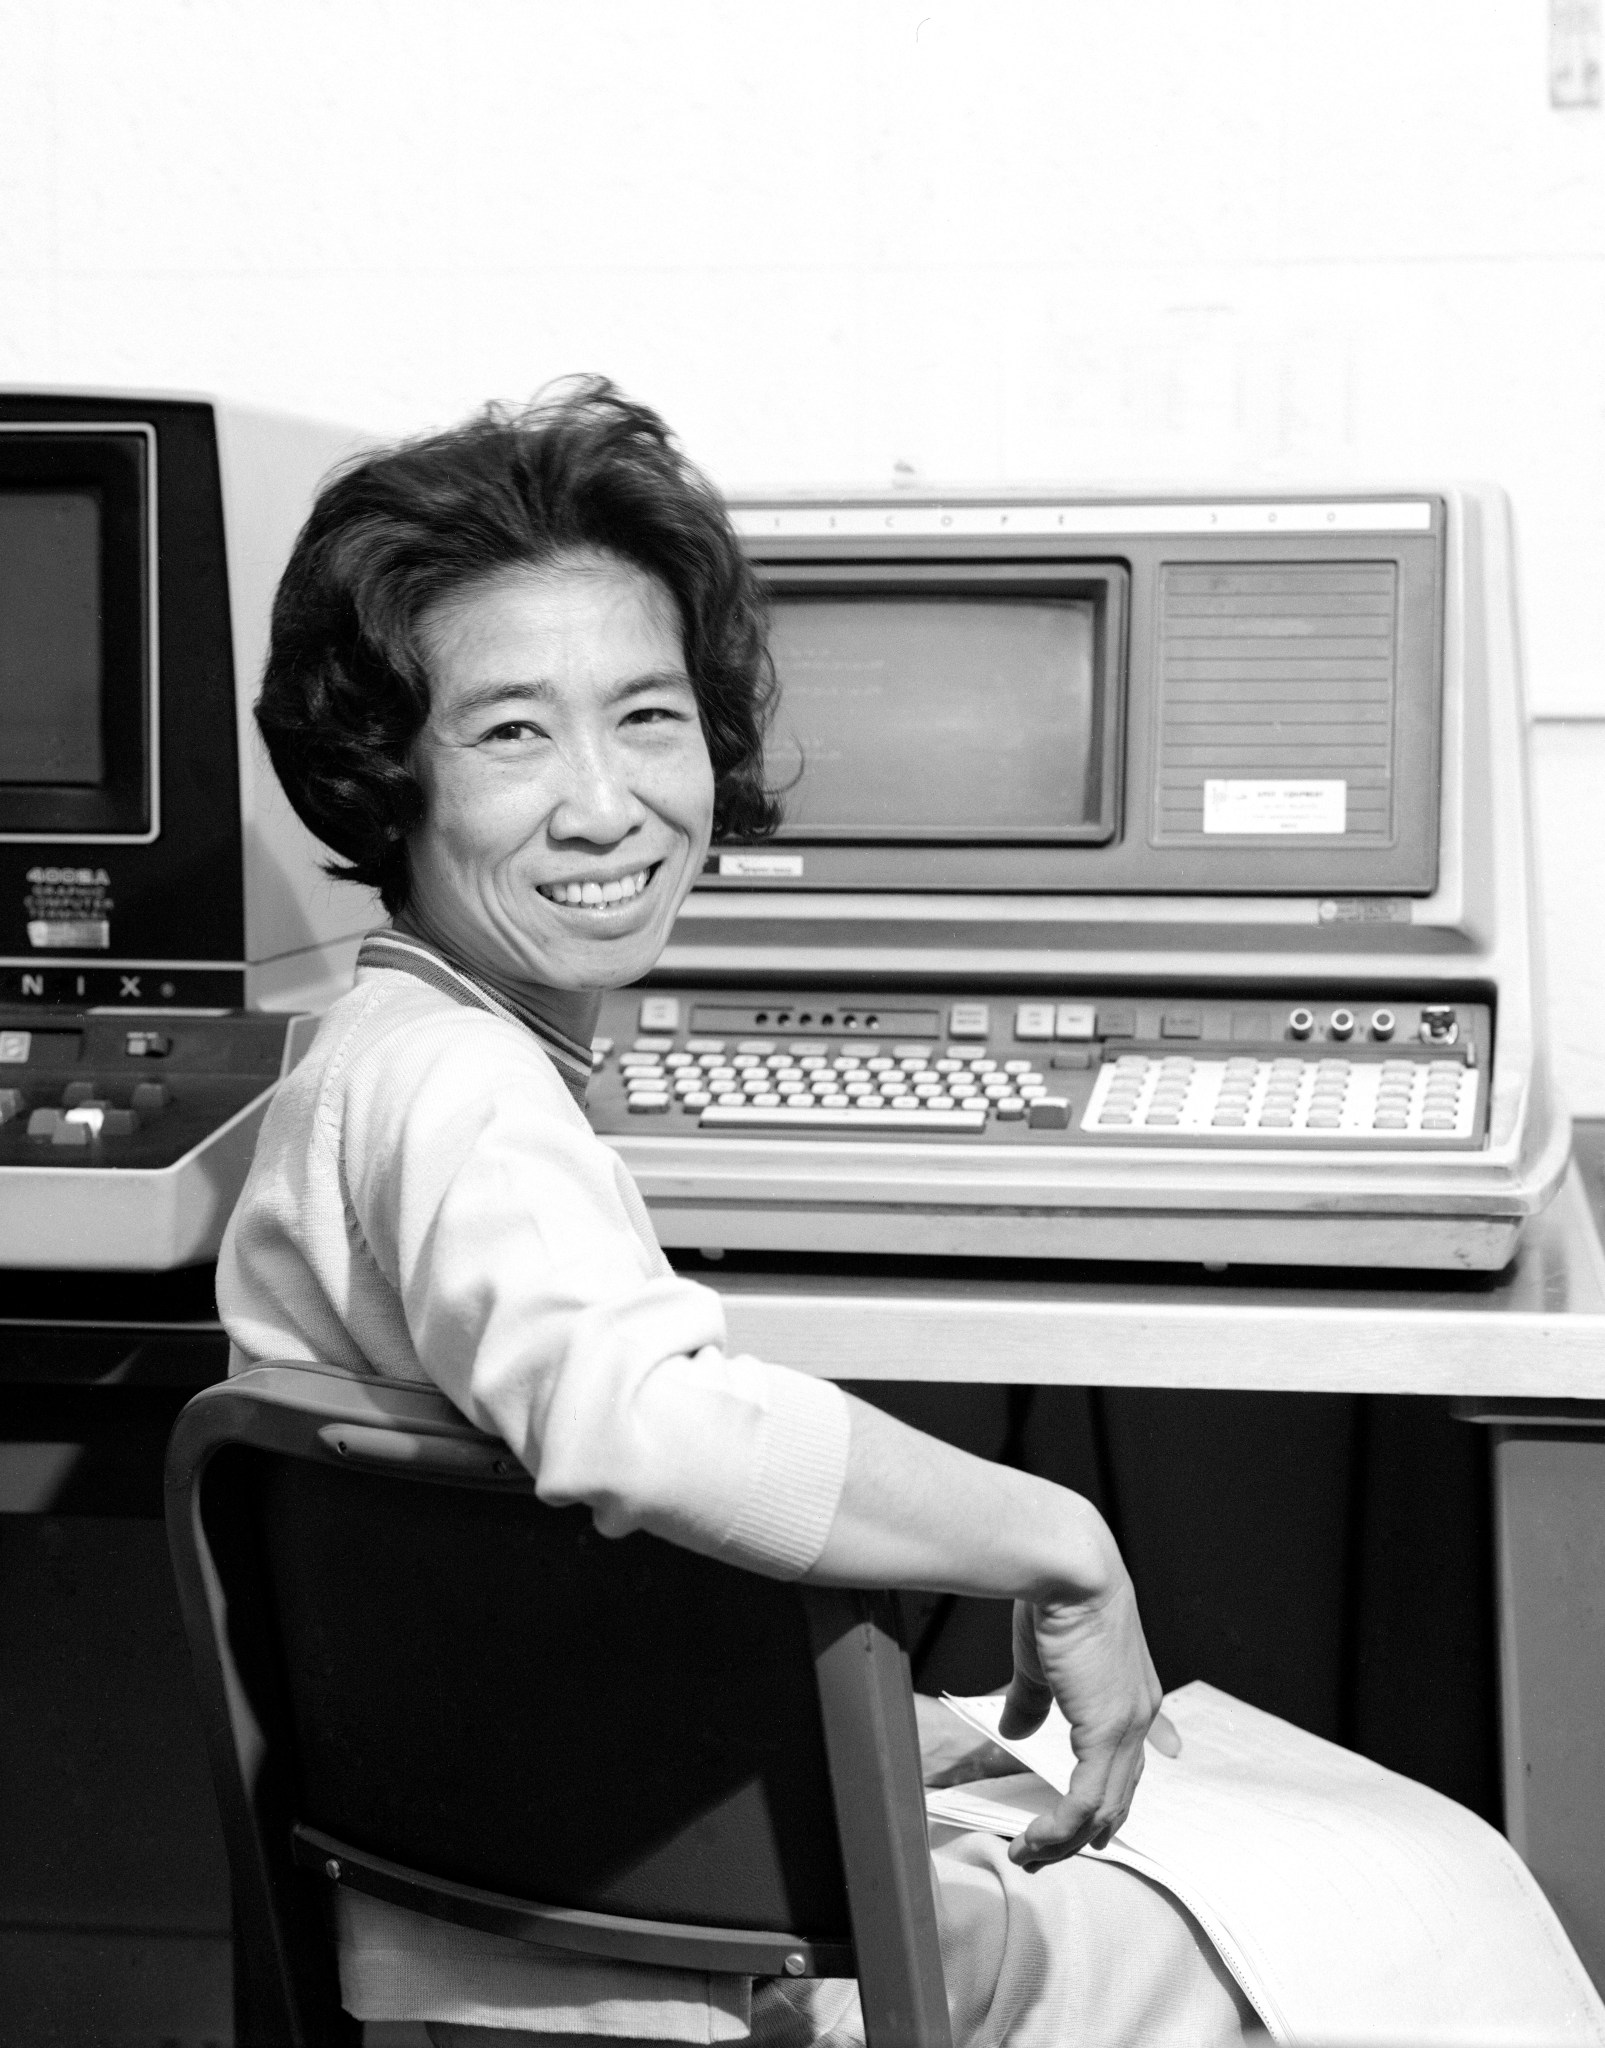 Helen Ling, an Asian woman, looks over her shoulder at the camera. Her arm is resting on the back of the chair she's sitting on. In front of her are several large computers.